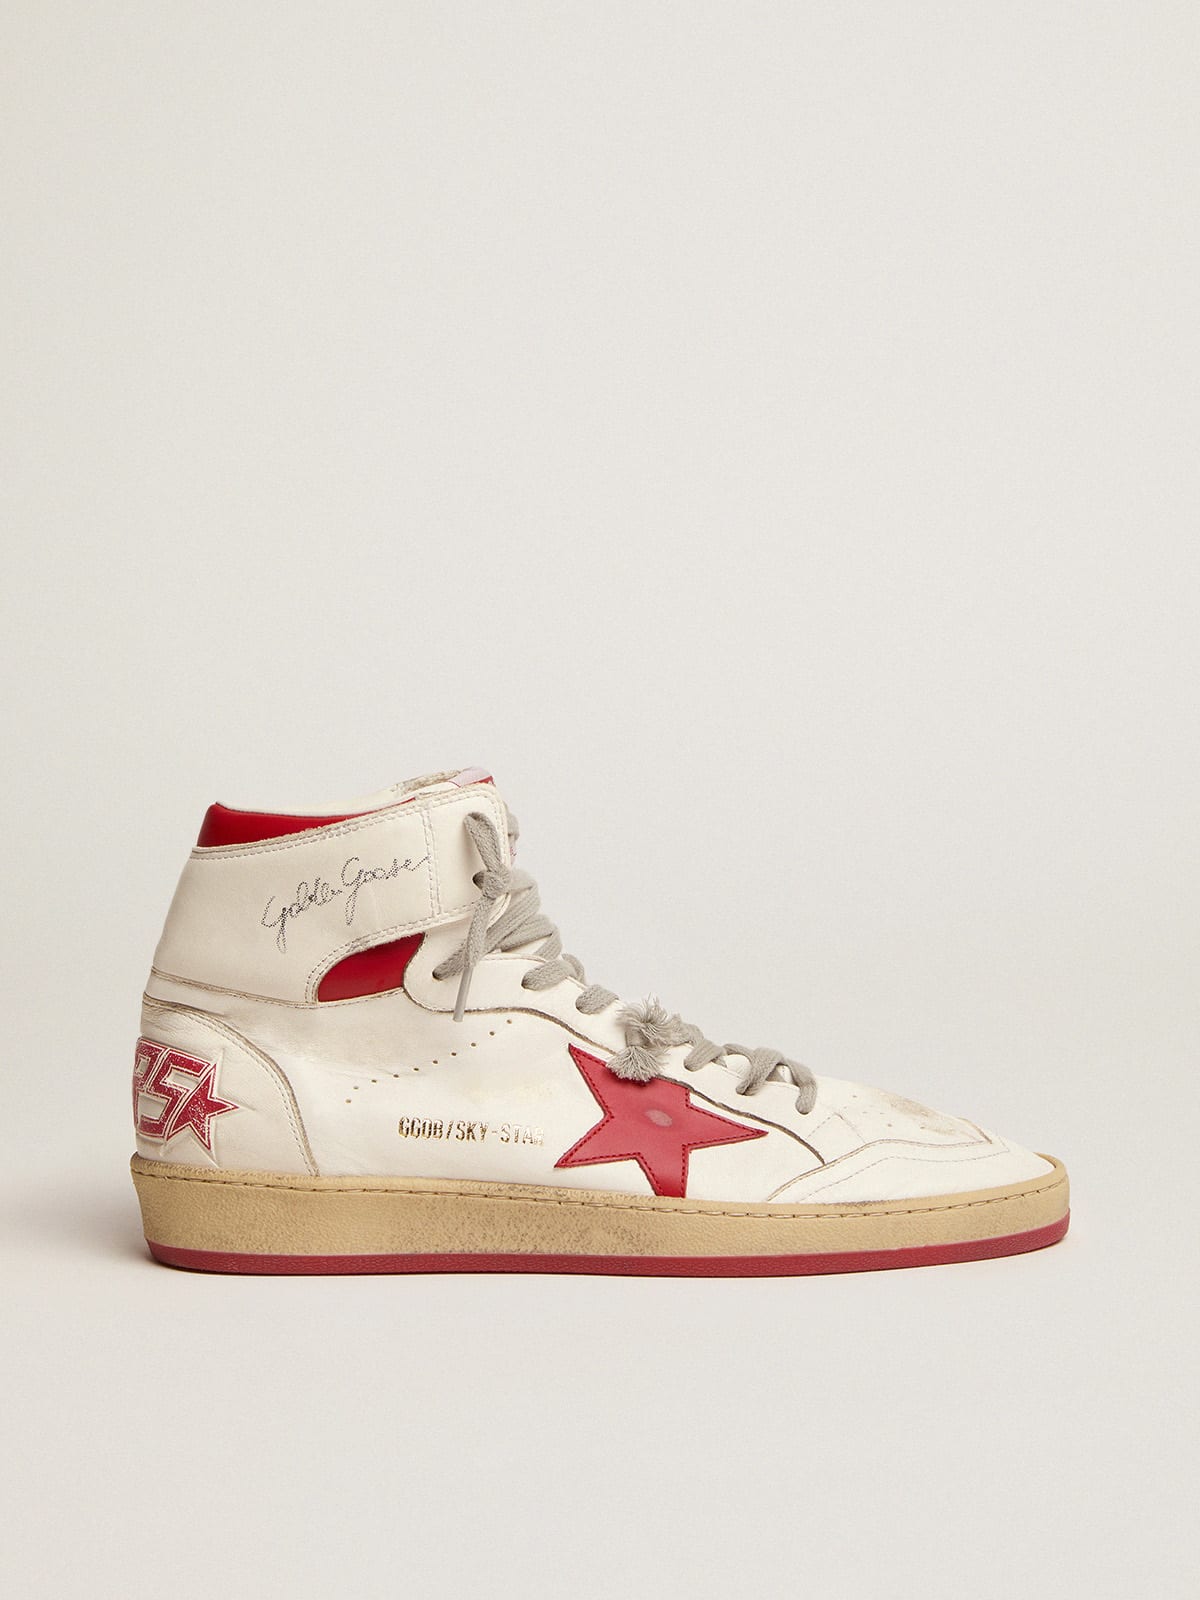 Sky-Star sneakers in white nappa leather with red leather star and heel tab